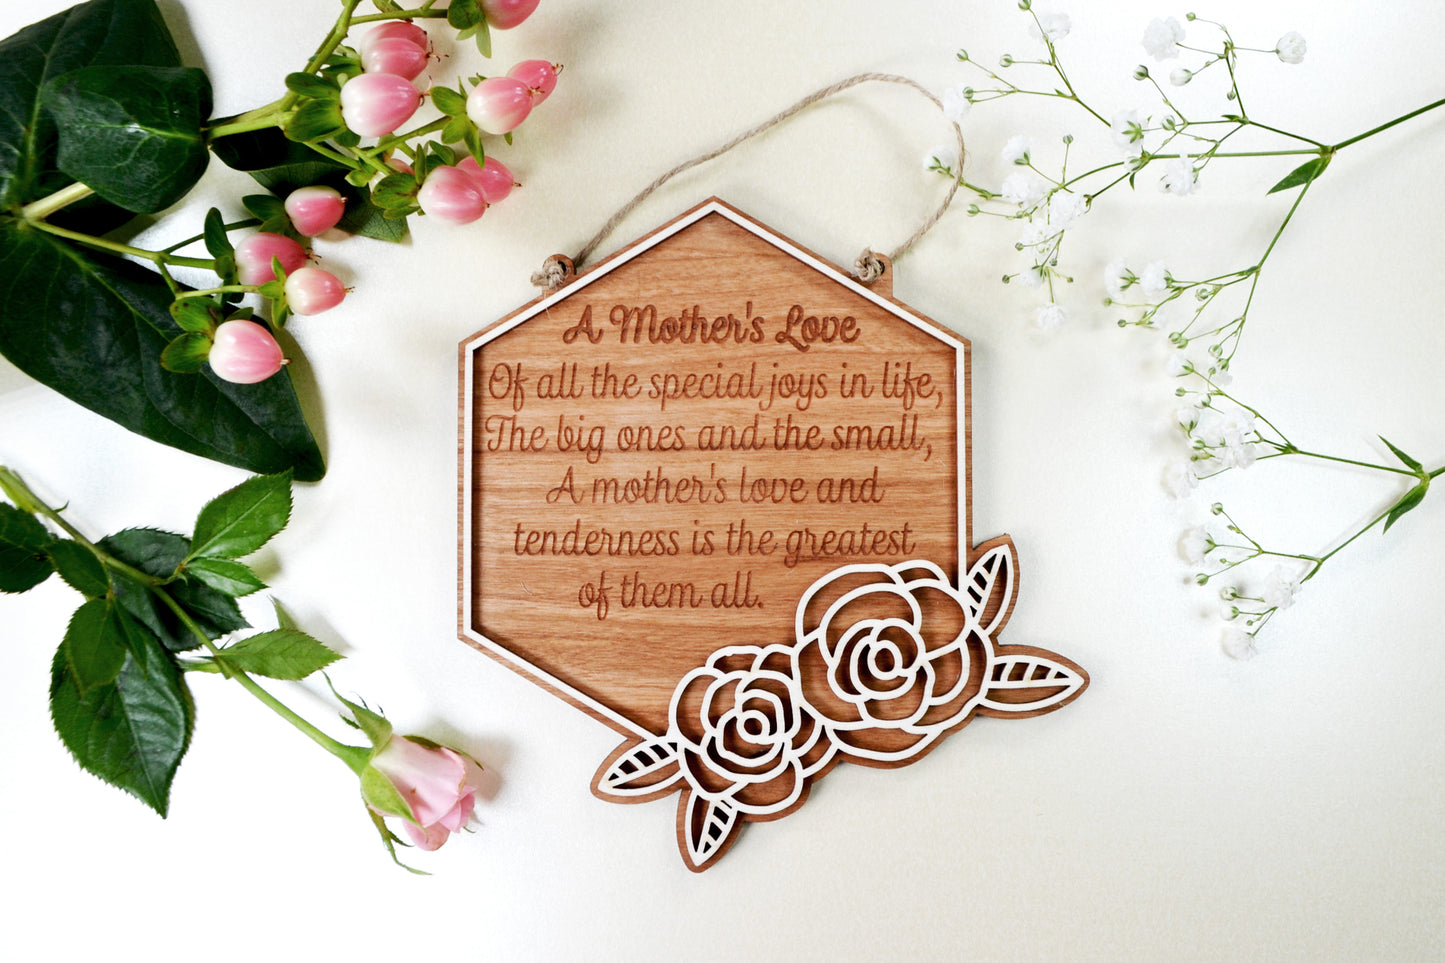 A Mothers Love - Wall plaque